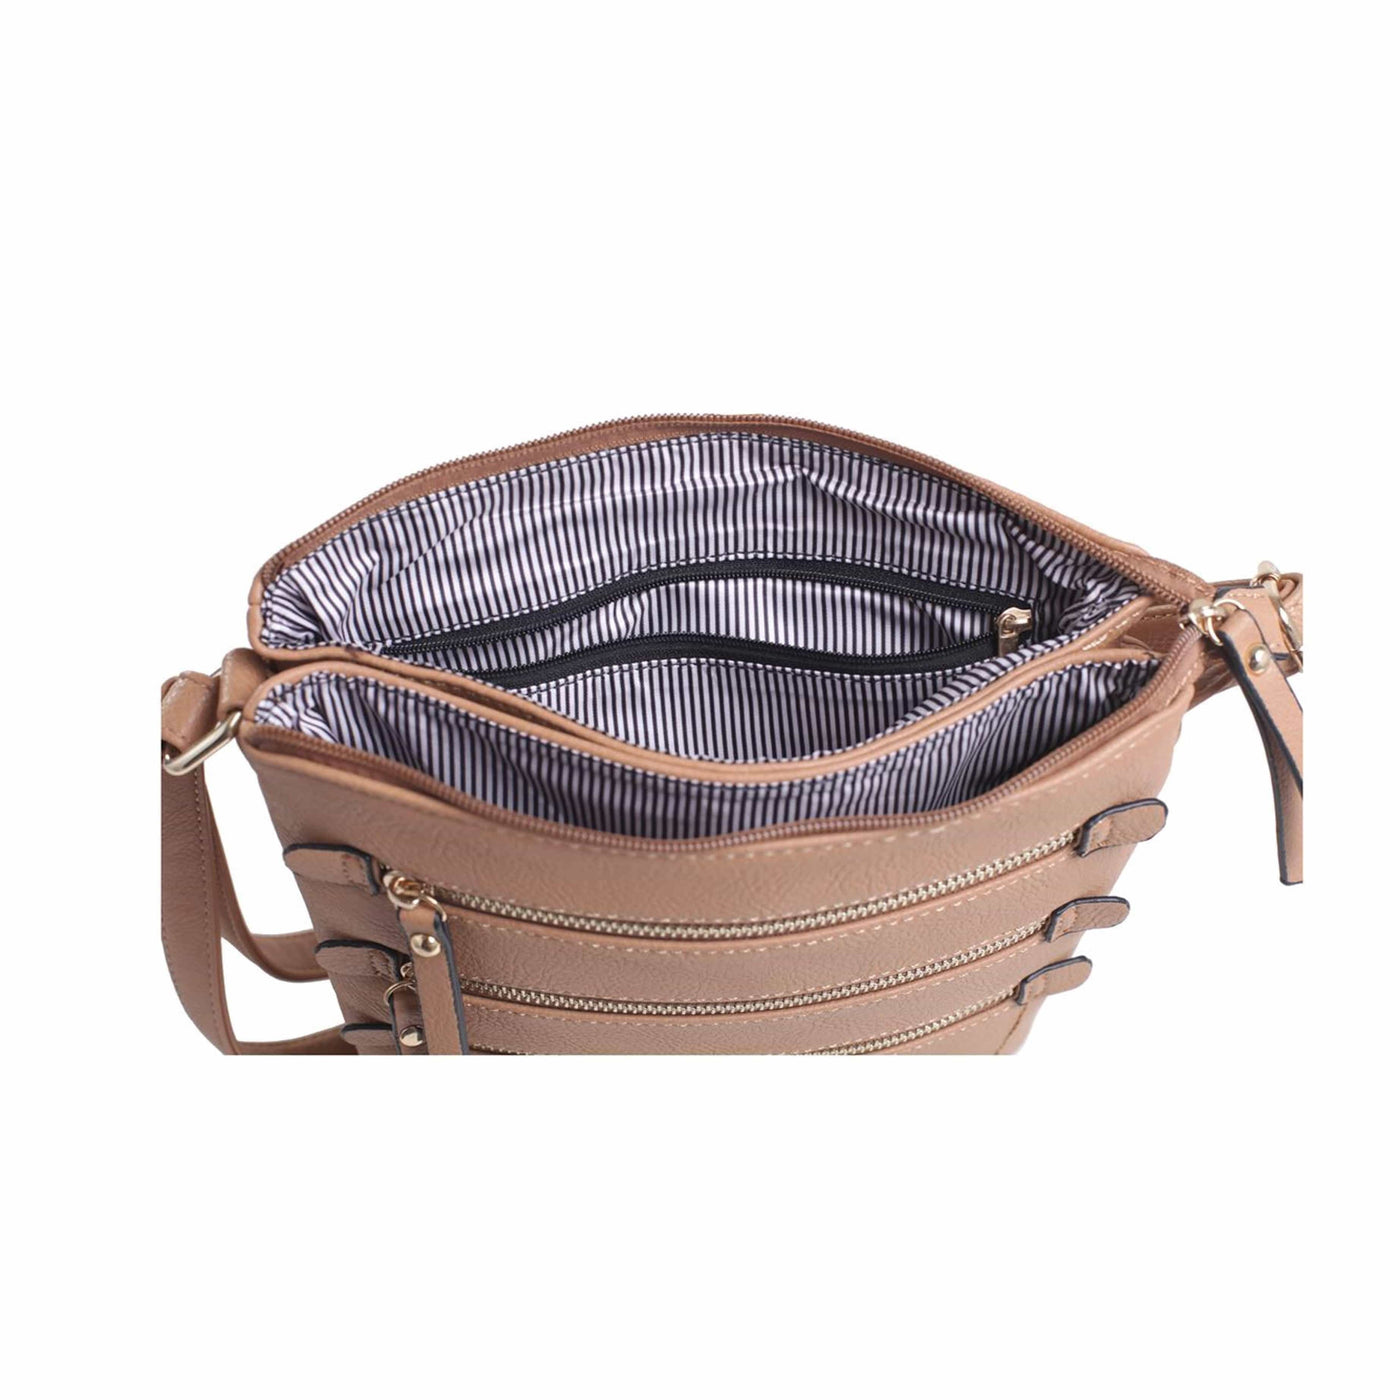 Concealed Carry Piper Crossbody by Jessie James